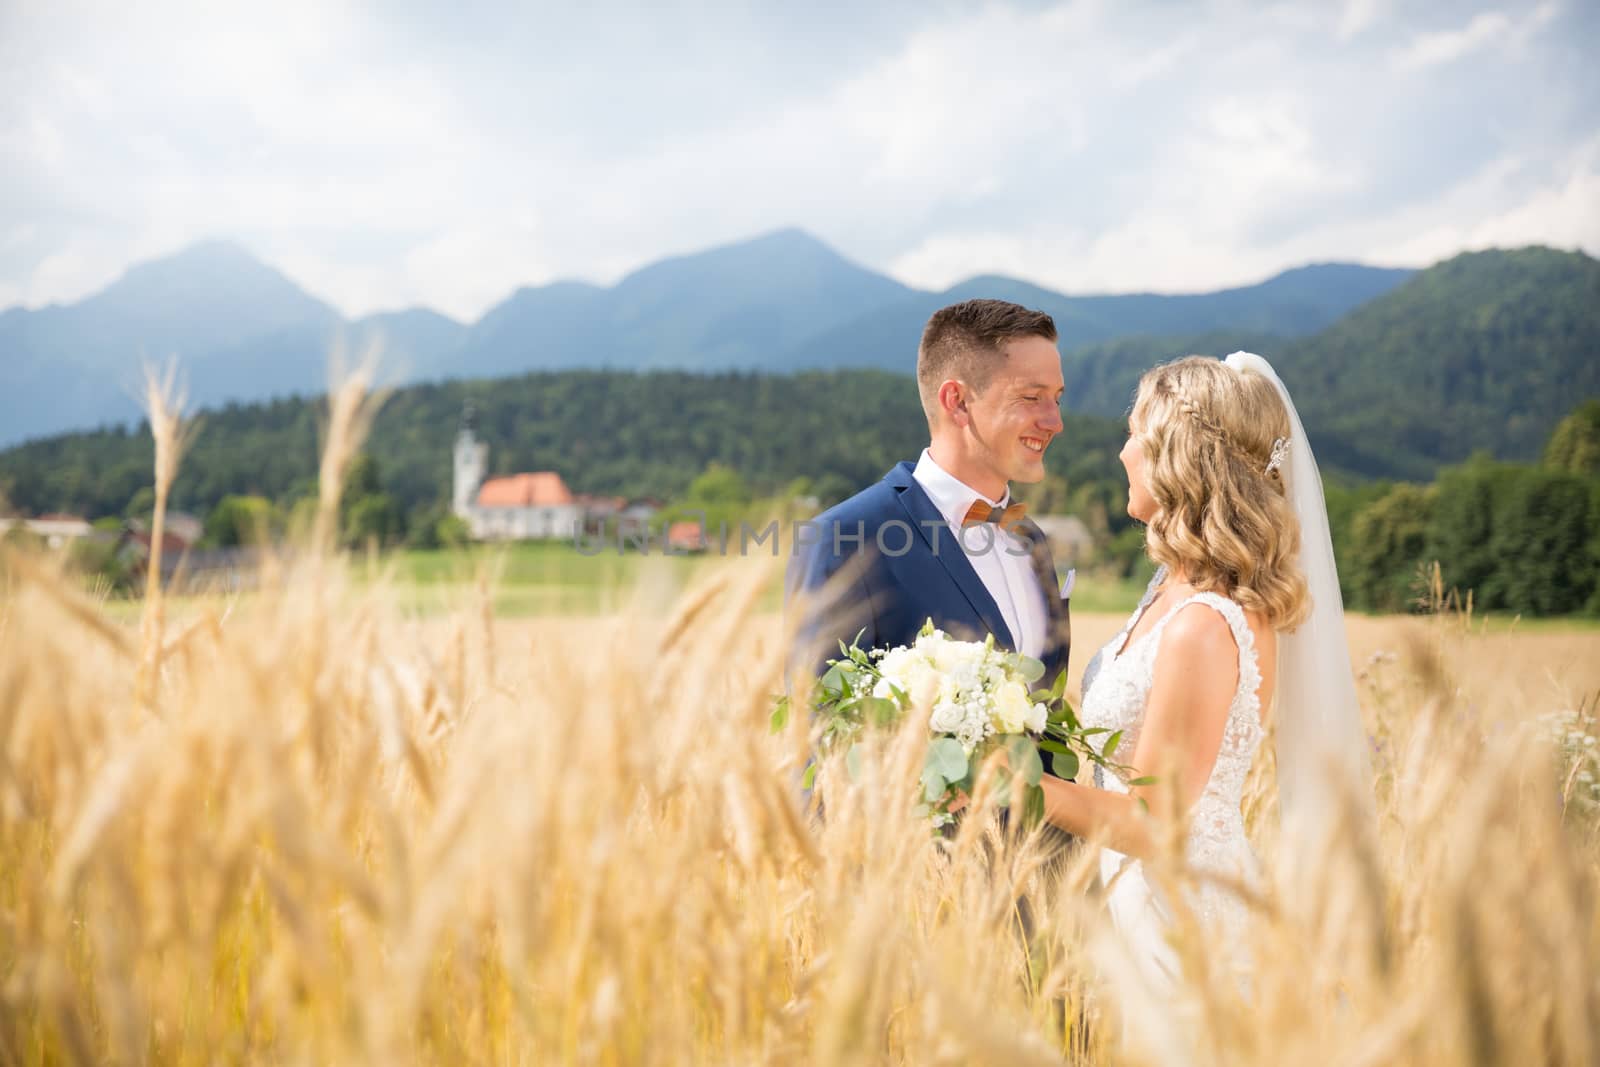 Groom hugs bride tenderly in wheat field somewhere in Slovenian countryside. Caucasian happy romantic young couple celebrating their marriage.